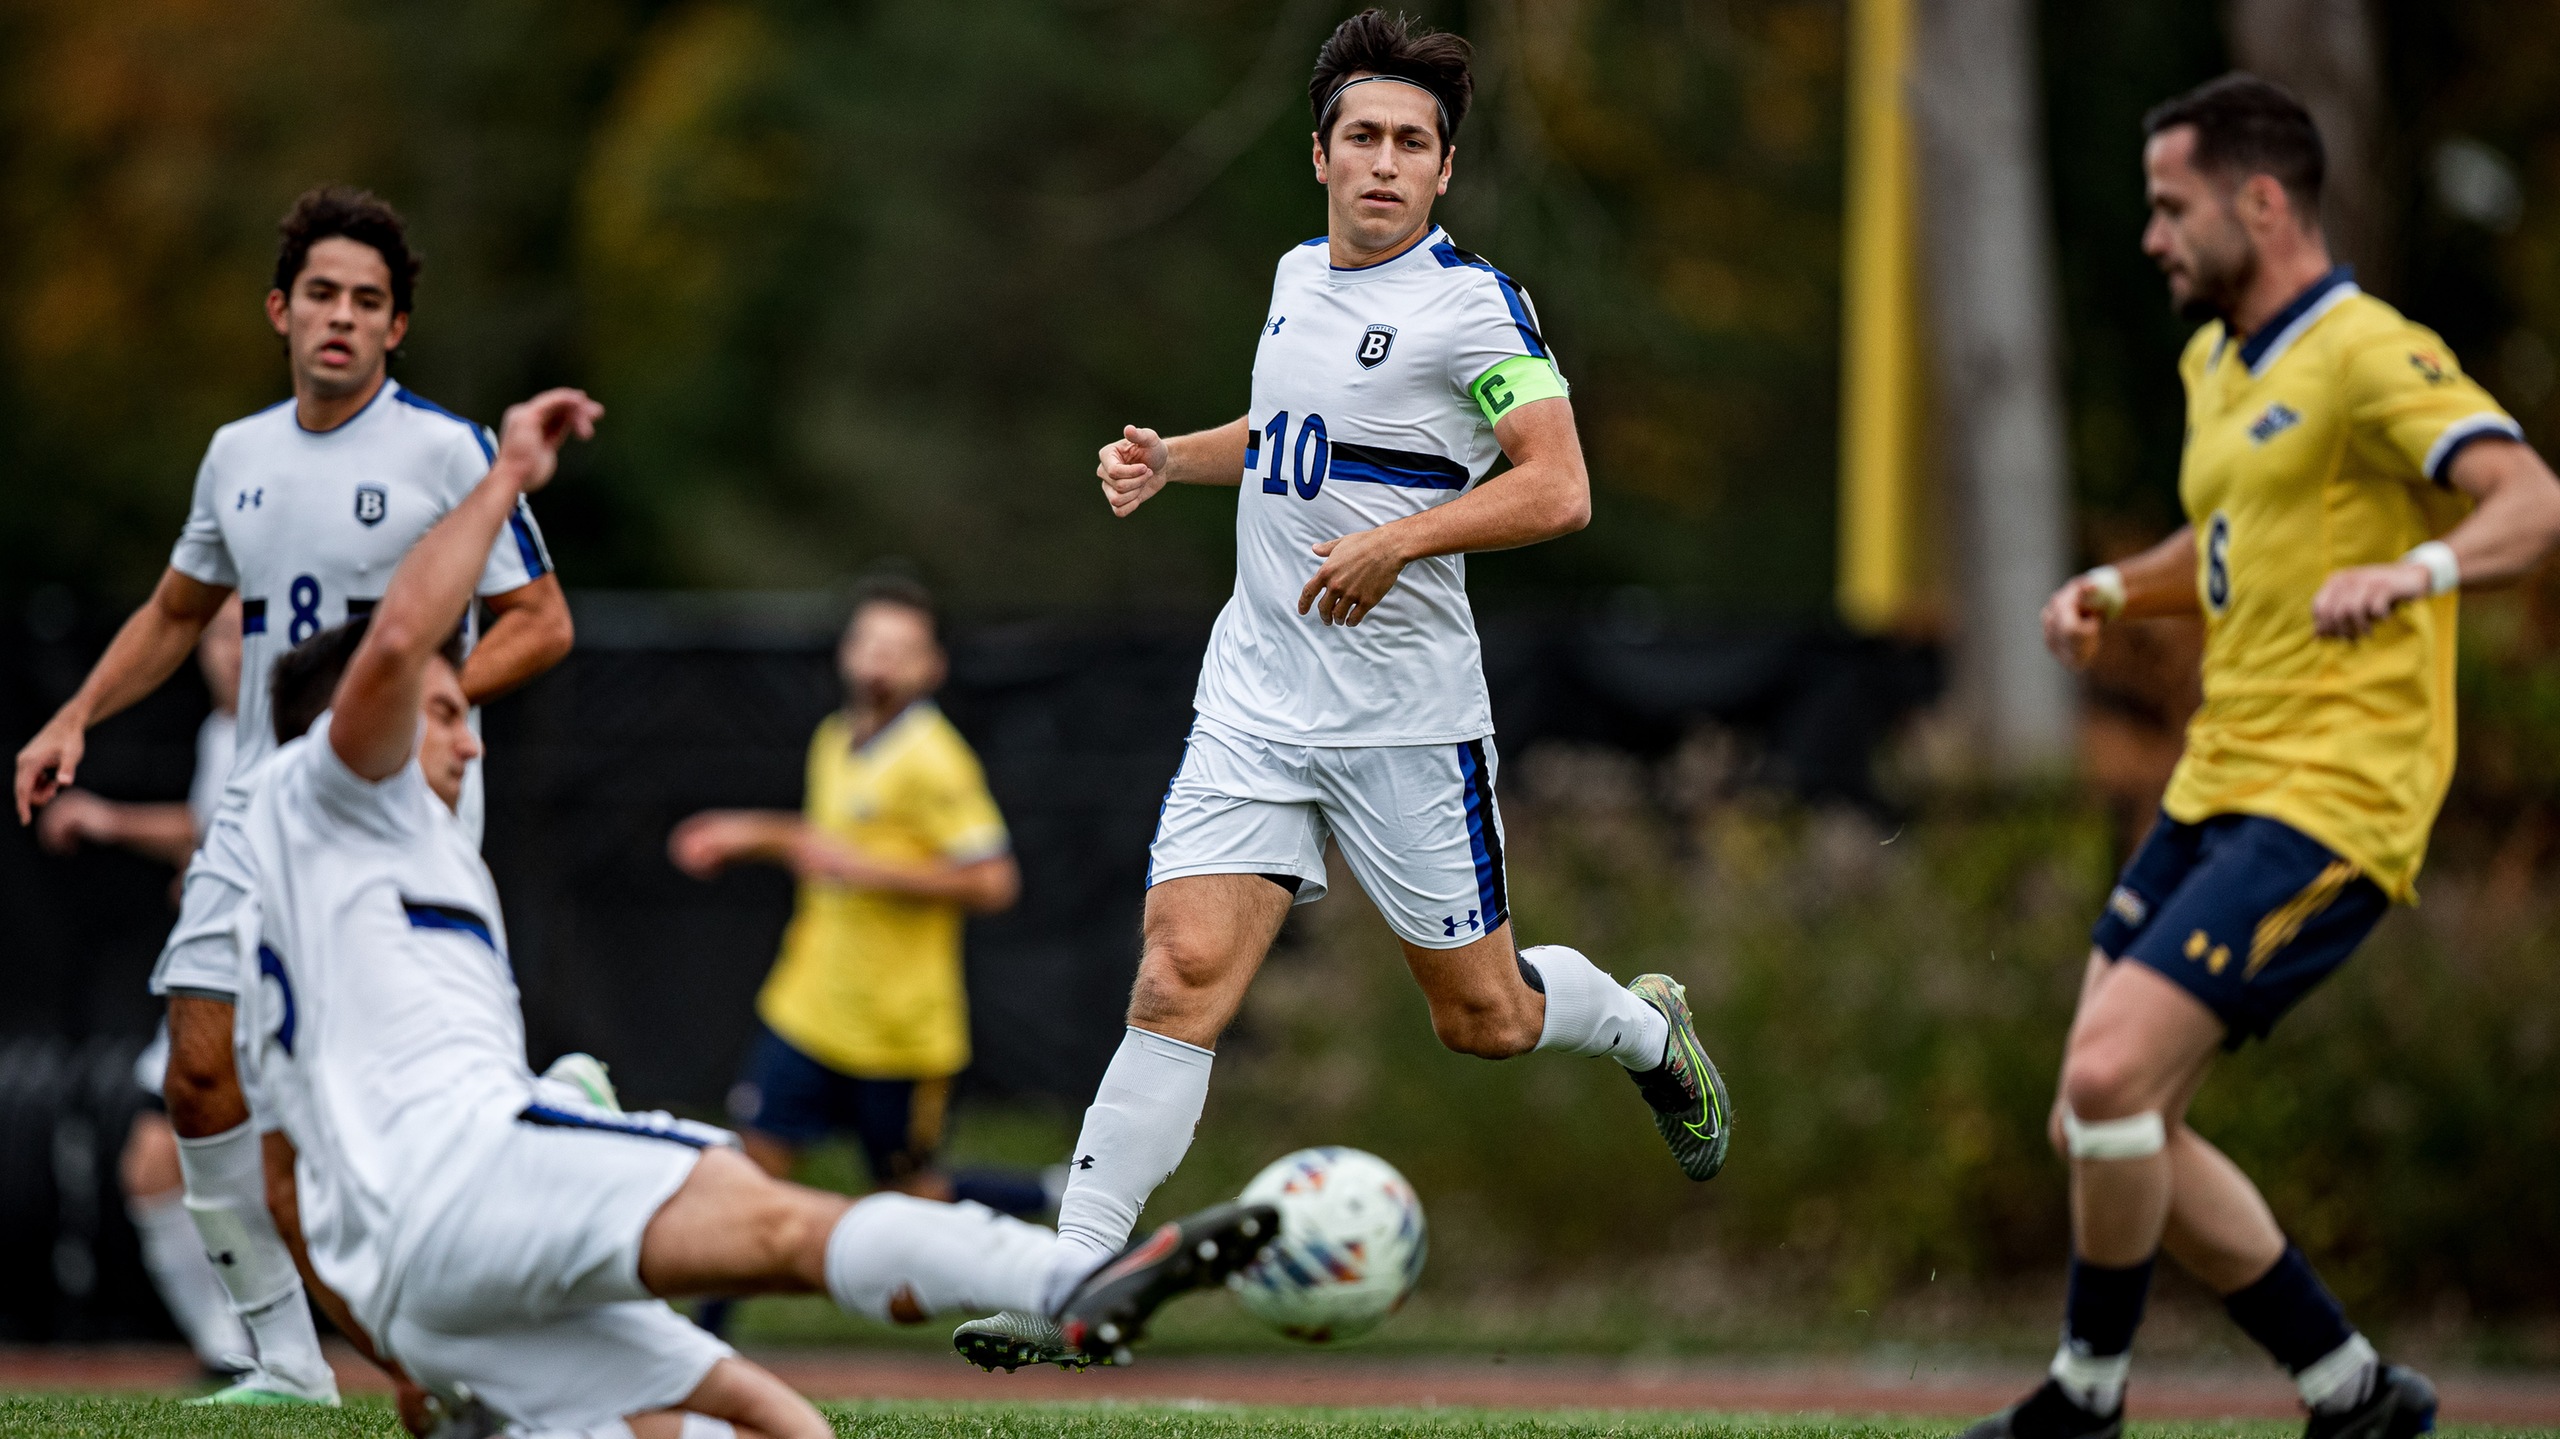 Bentley Falls to Southern N.H. 2-0 in NE10 Championship Quarterfinals